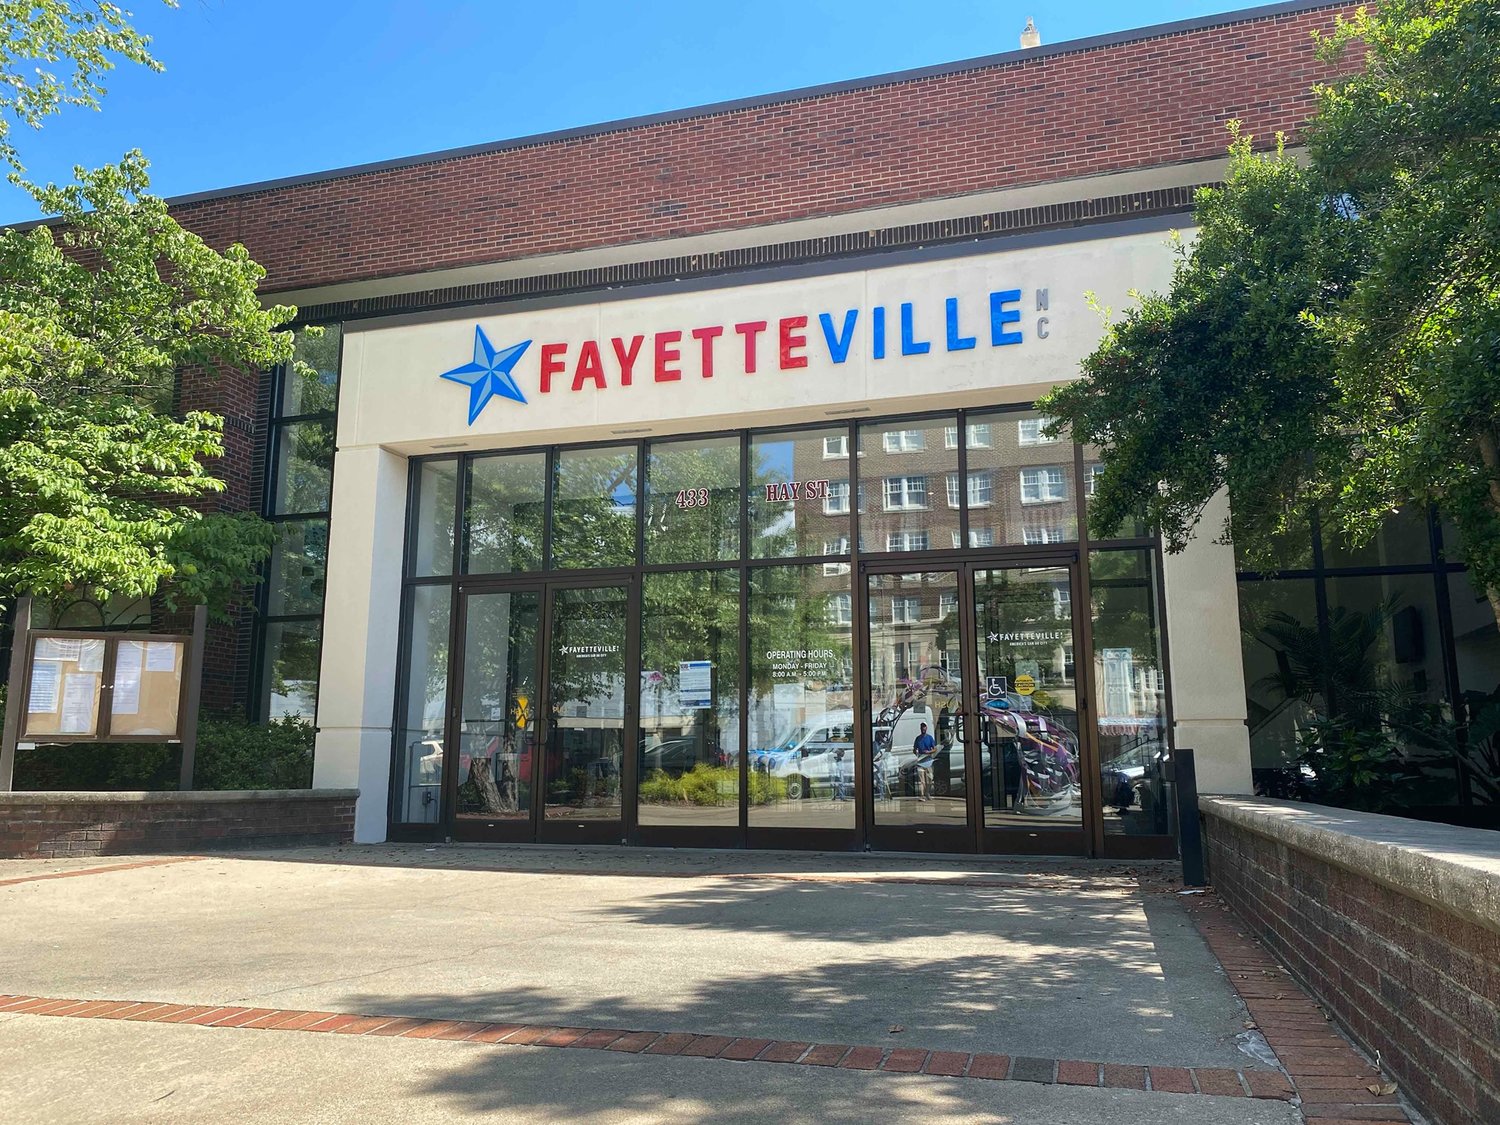 This spring the Fayetteville City Council will begin reviewing projects and programs that are expected to be funded from the initial $20 million received from the federal American Rescue Plan.